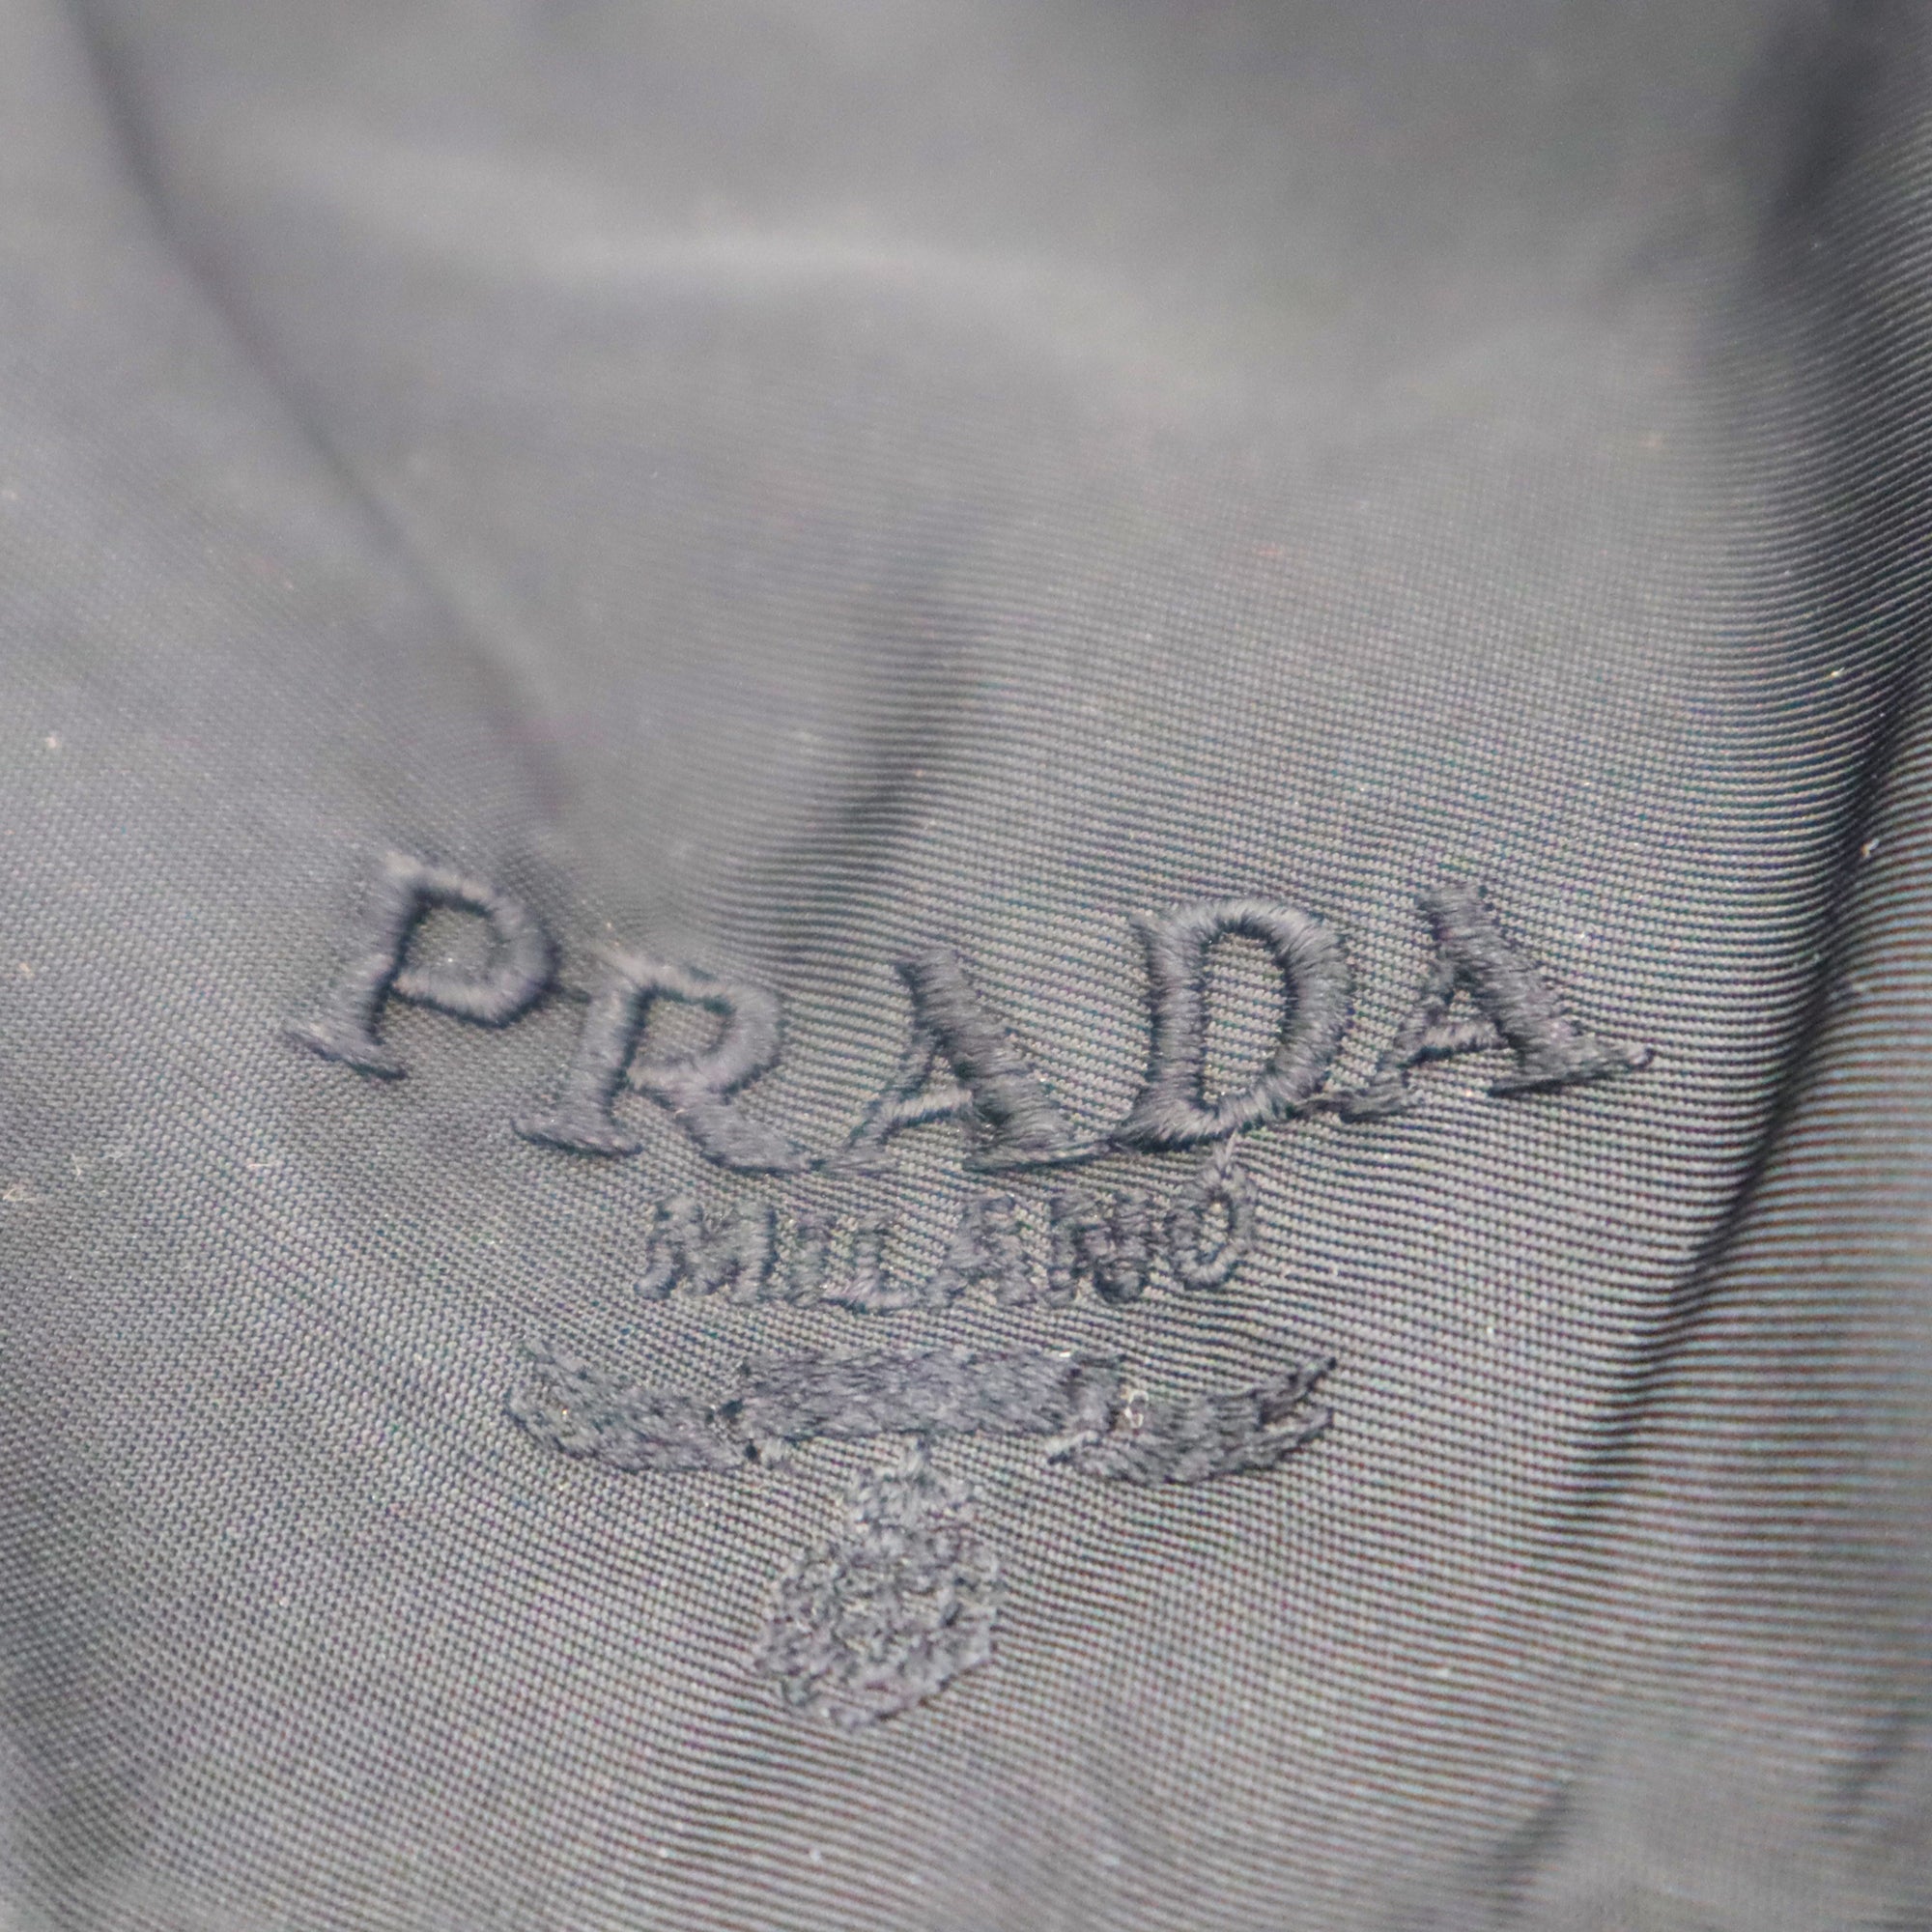 DEAL OF THE DAY Pre-Owned Prada Nylon Backpack